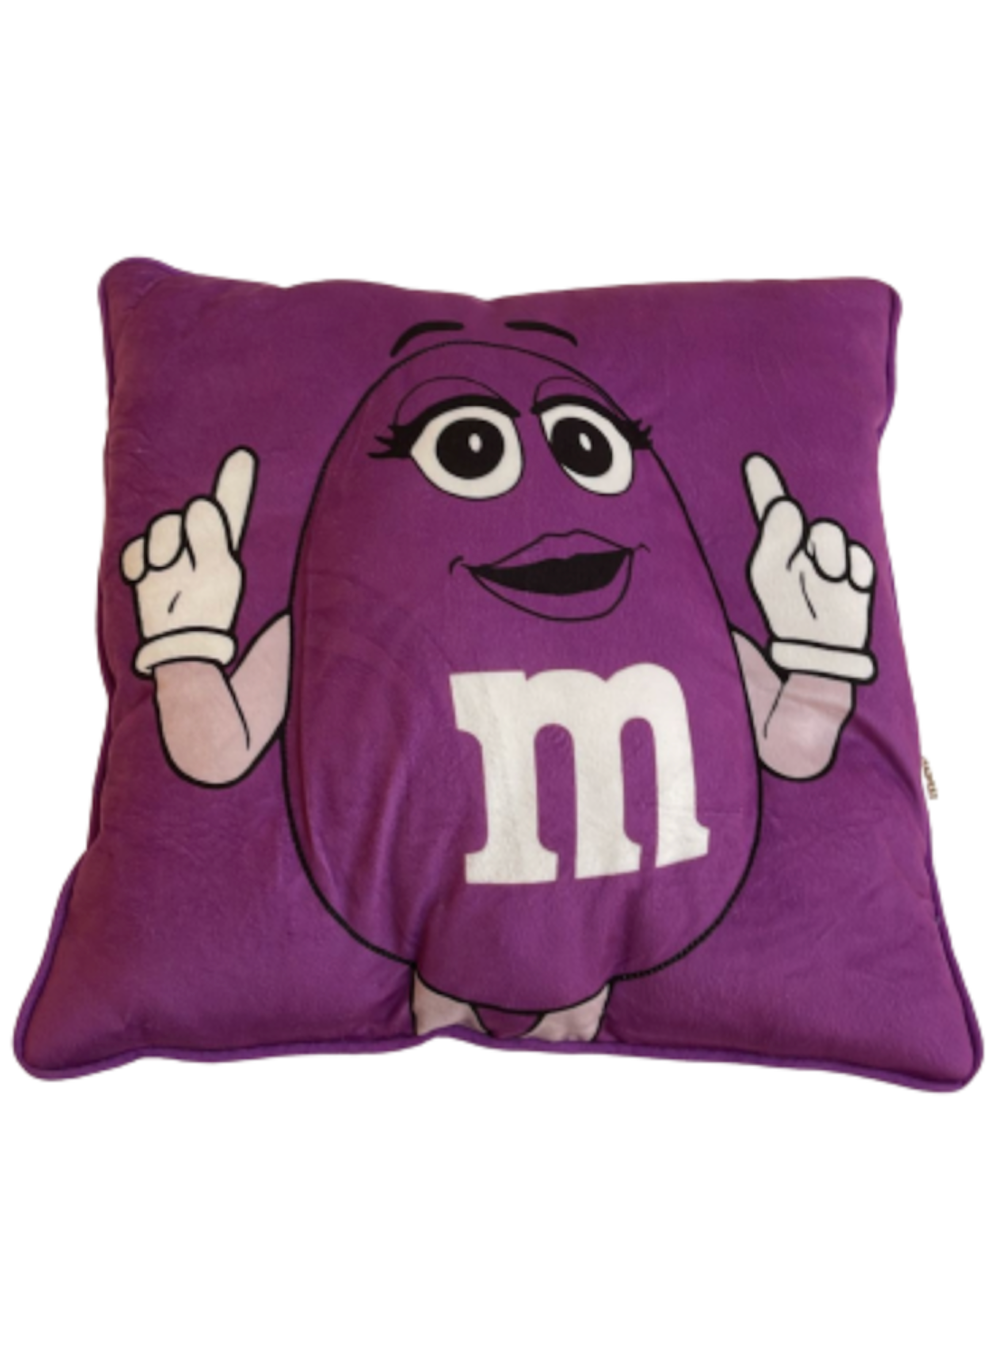 M&M's World Purple Character Pillow Plush New with Tag